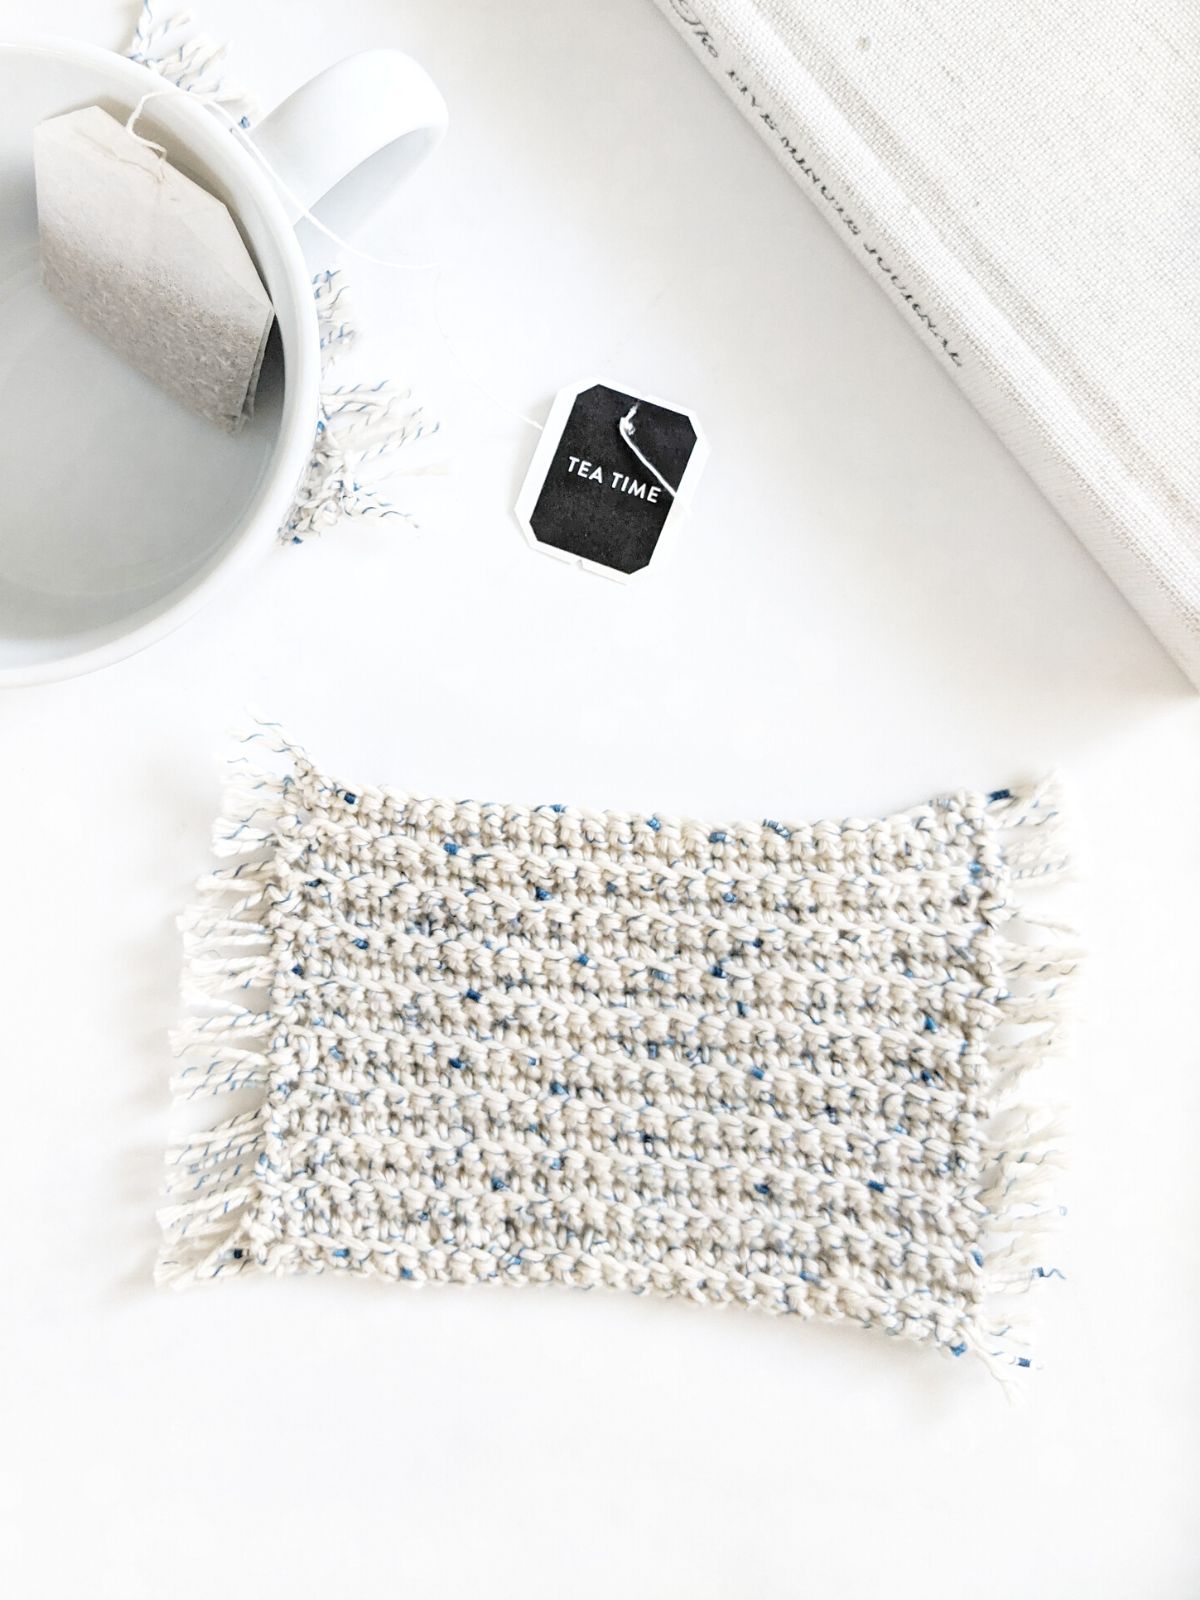 A crochet coaster with fringe and a teacup with a tea bag. 